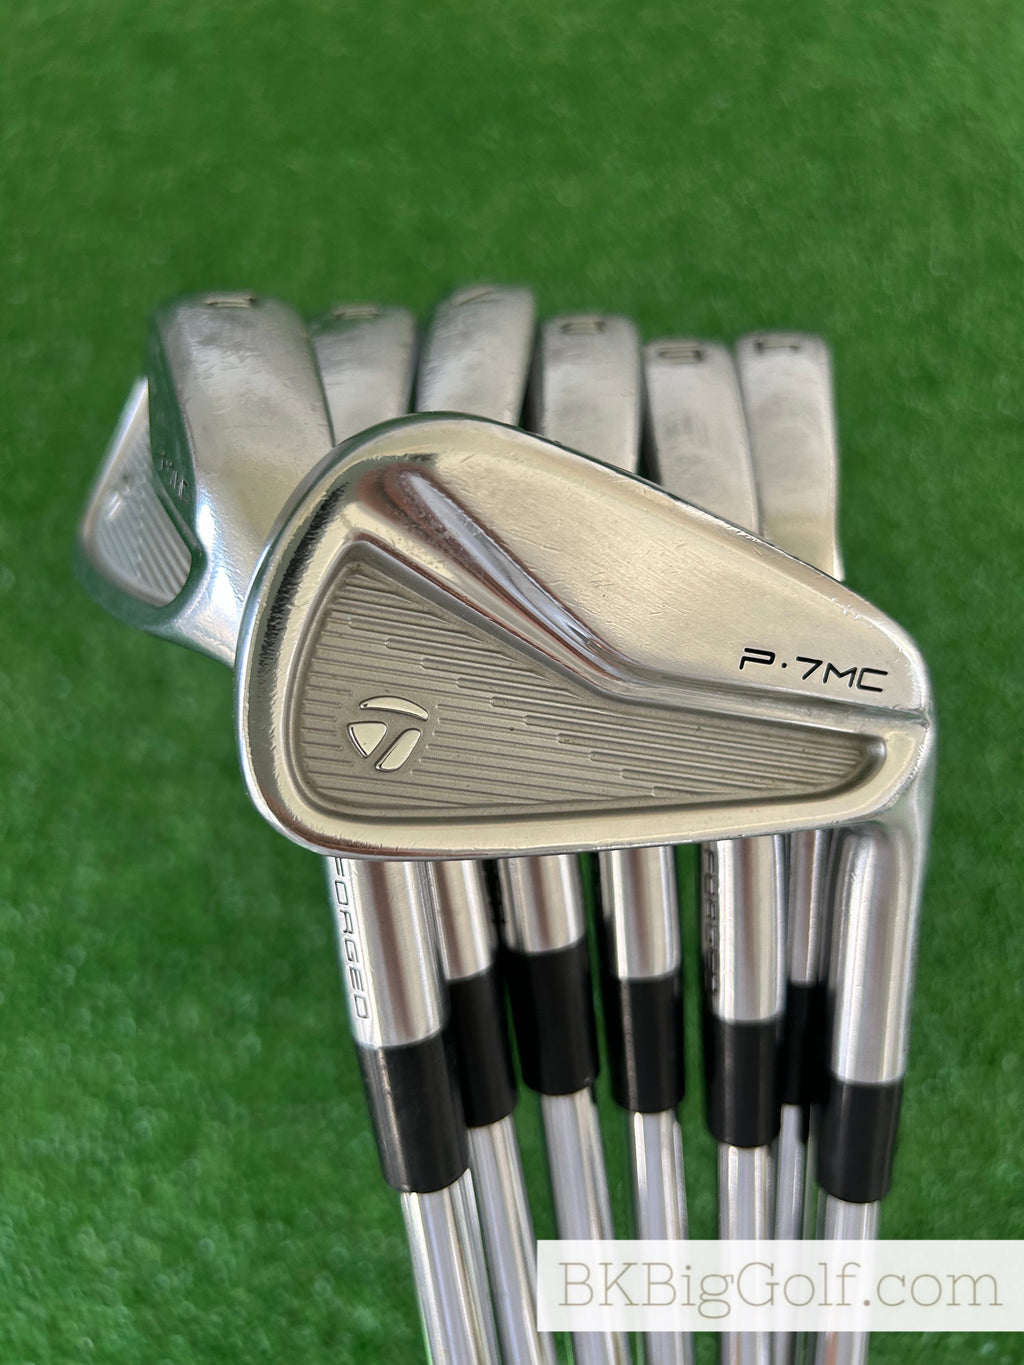 Taylormade P7MC Forged Iron Set 4-P / Dynamic Gold Tour Issue X100 Extra Stiff